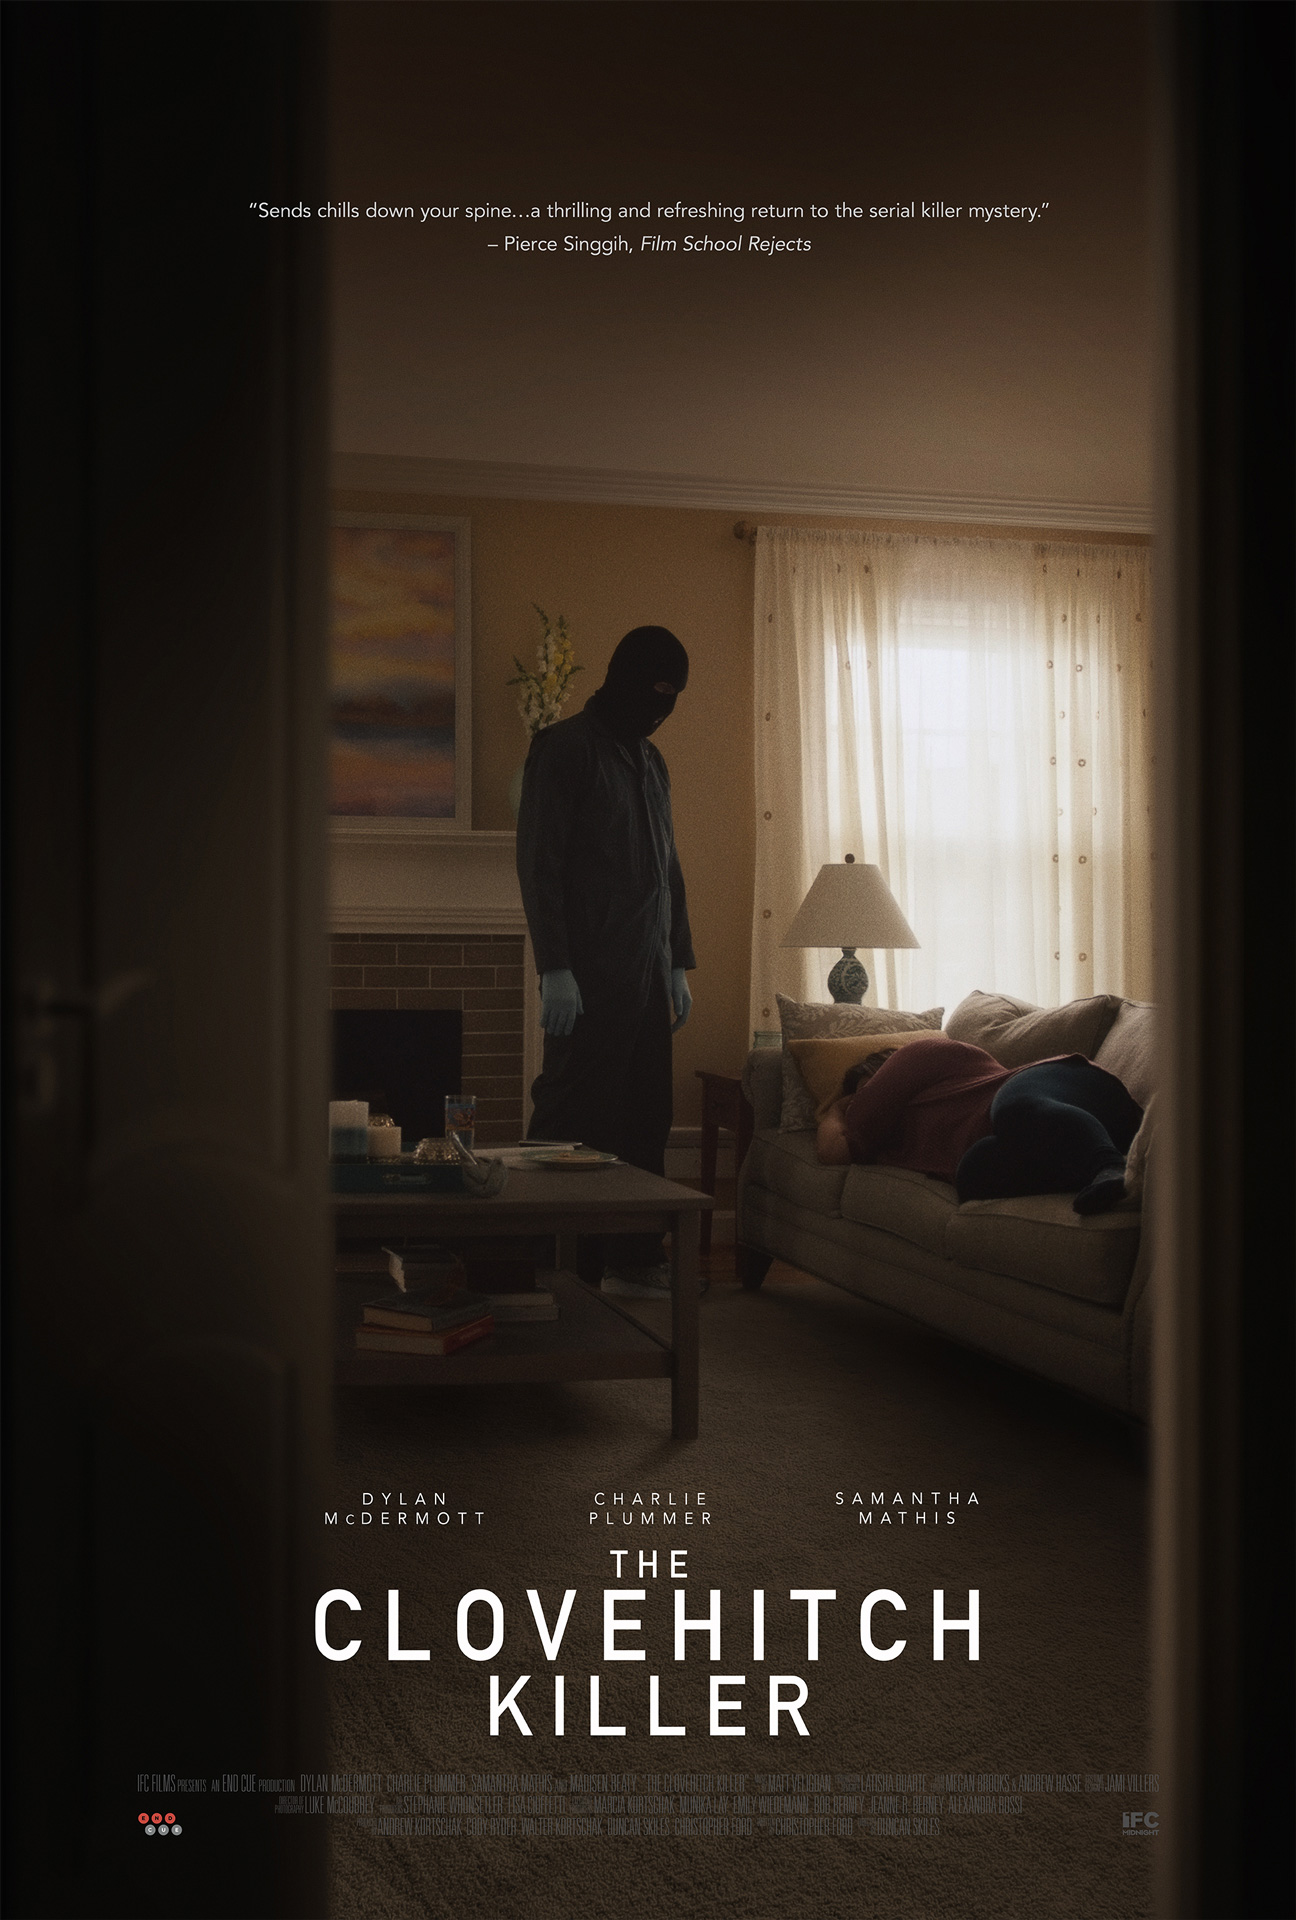 The Clovehitch Killer film poster, it shows a masked man standing in a room